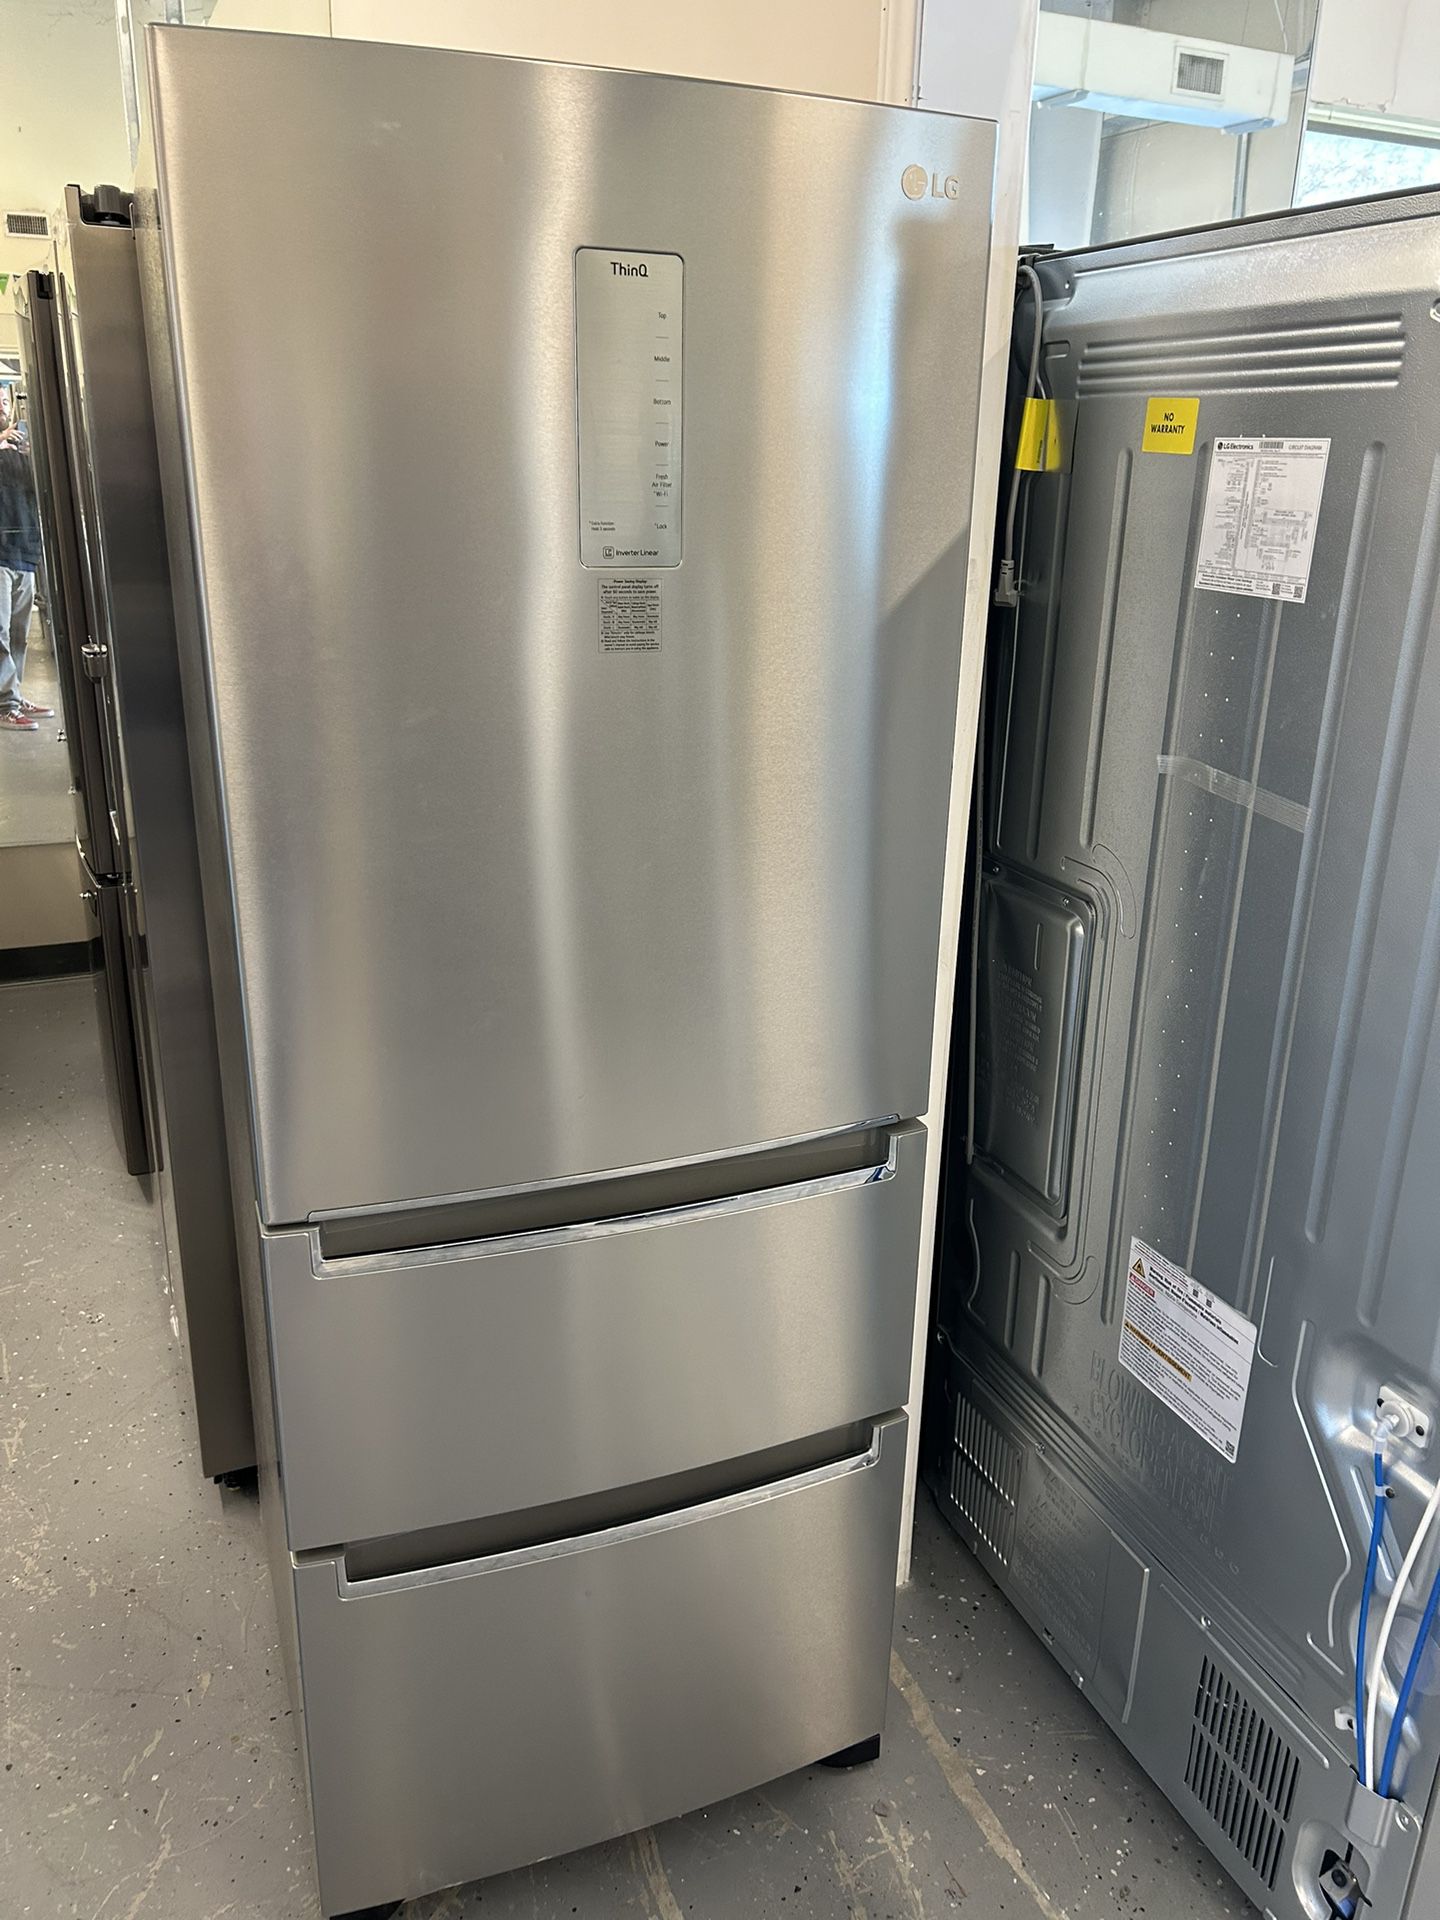 ❄️Never Used LG 11.7 cubic ft Specialty Foods Refrigerator❄️